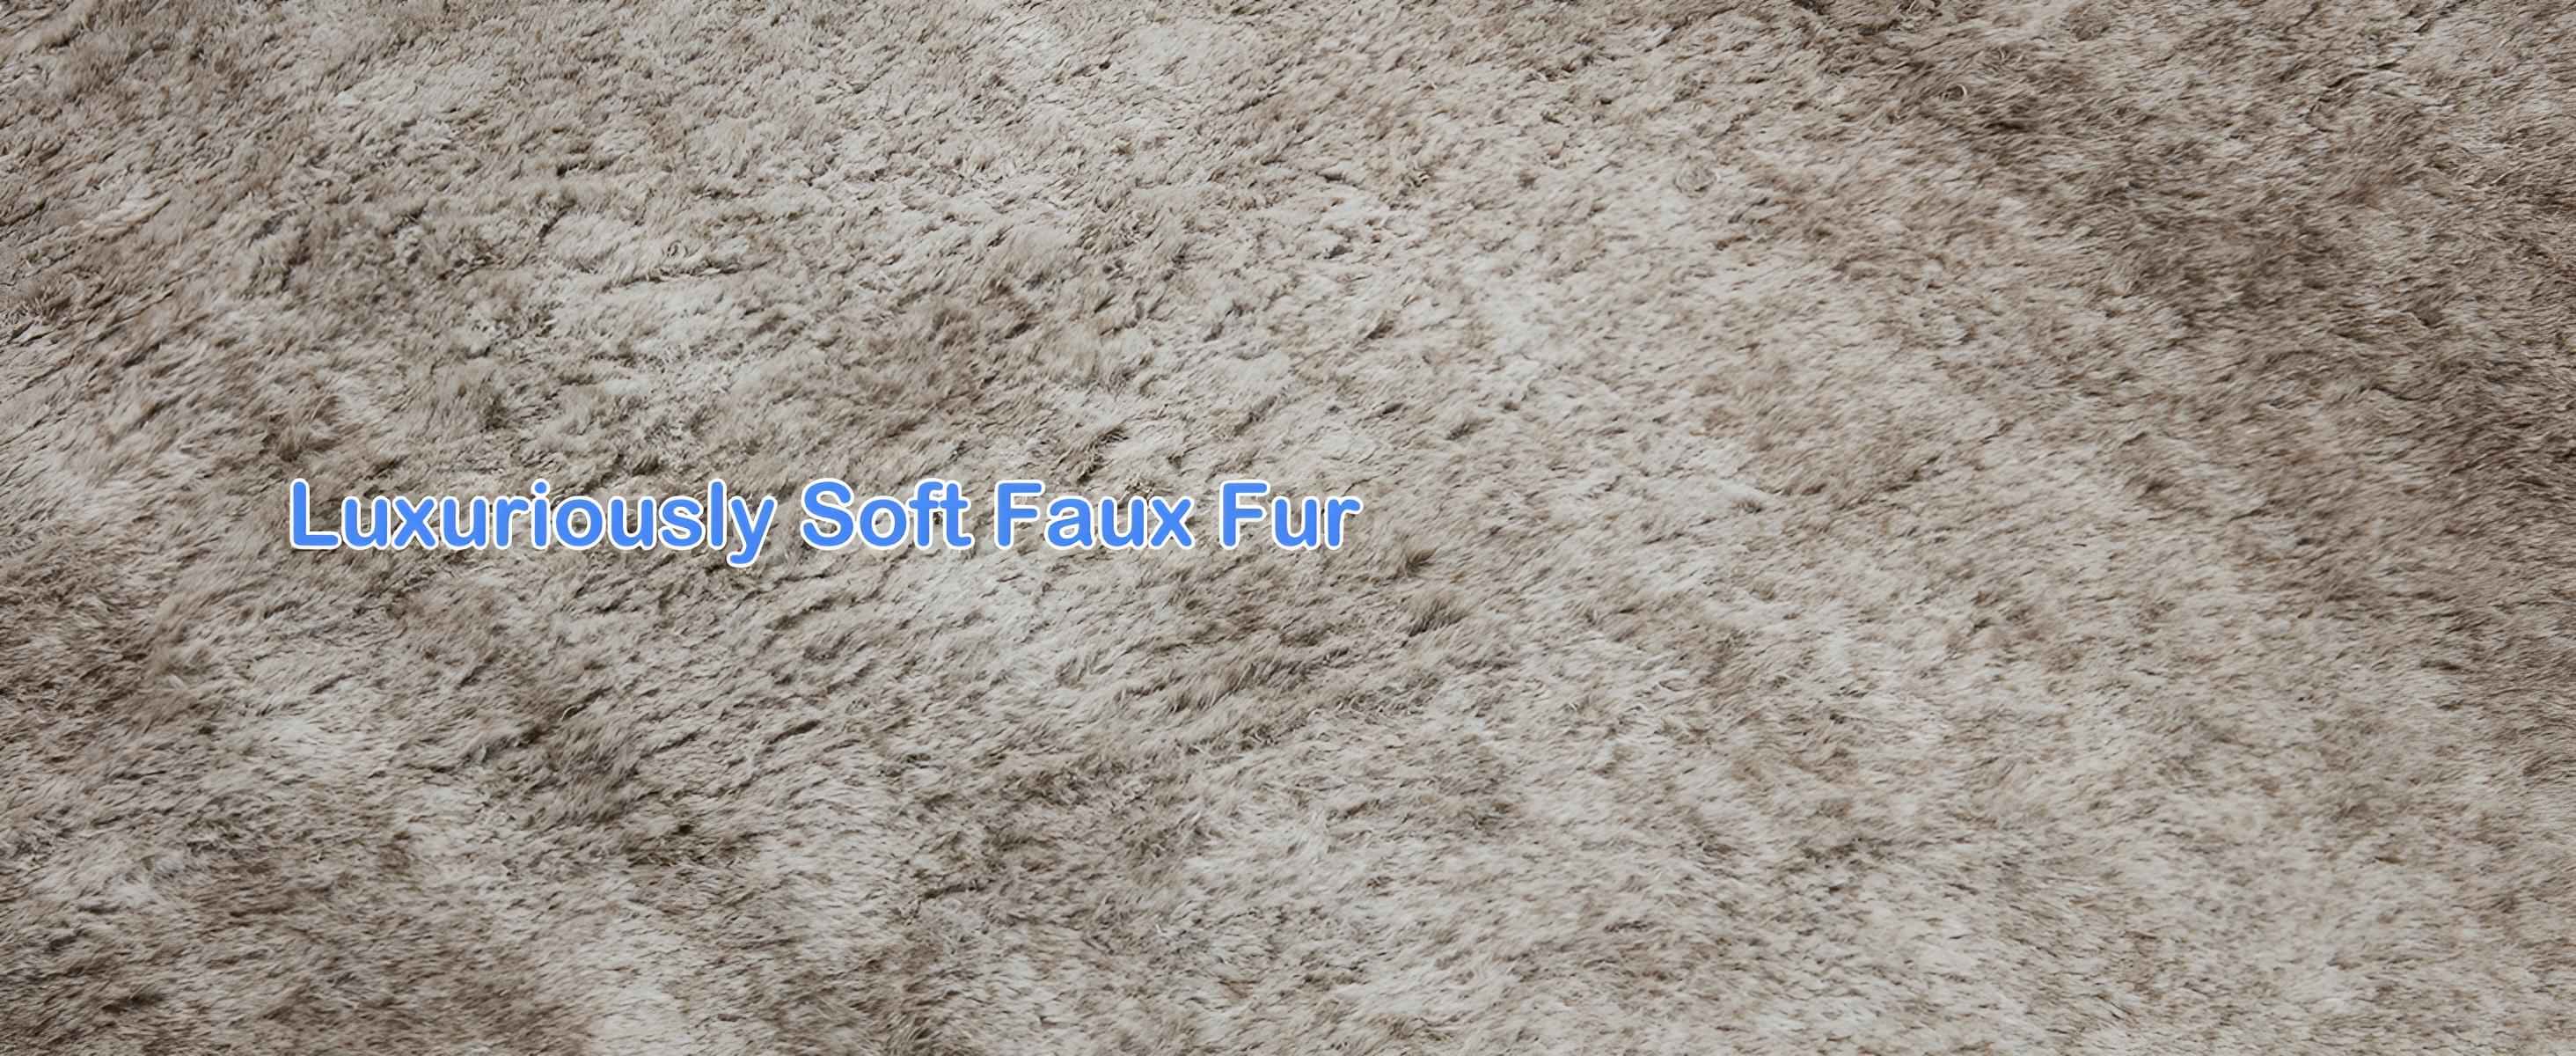 Luxuriously soft faux fur of the human dog beds